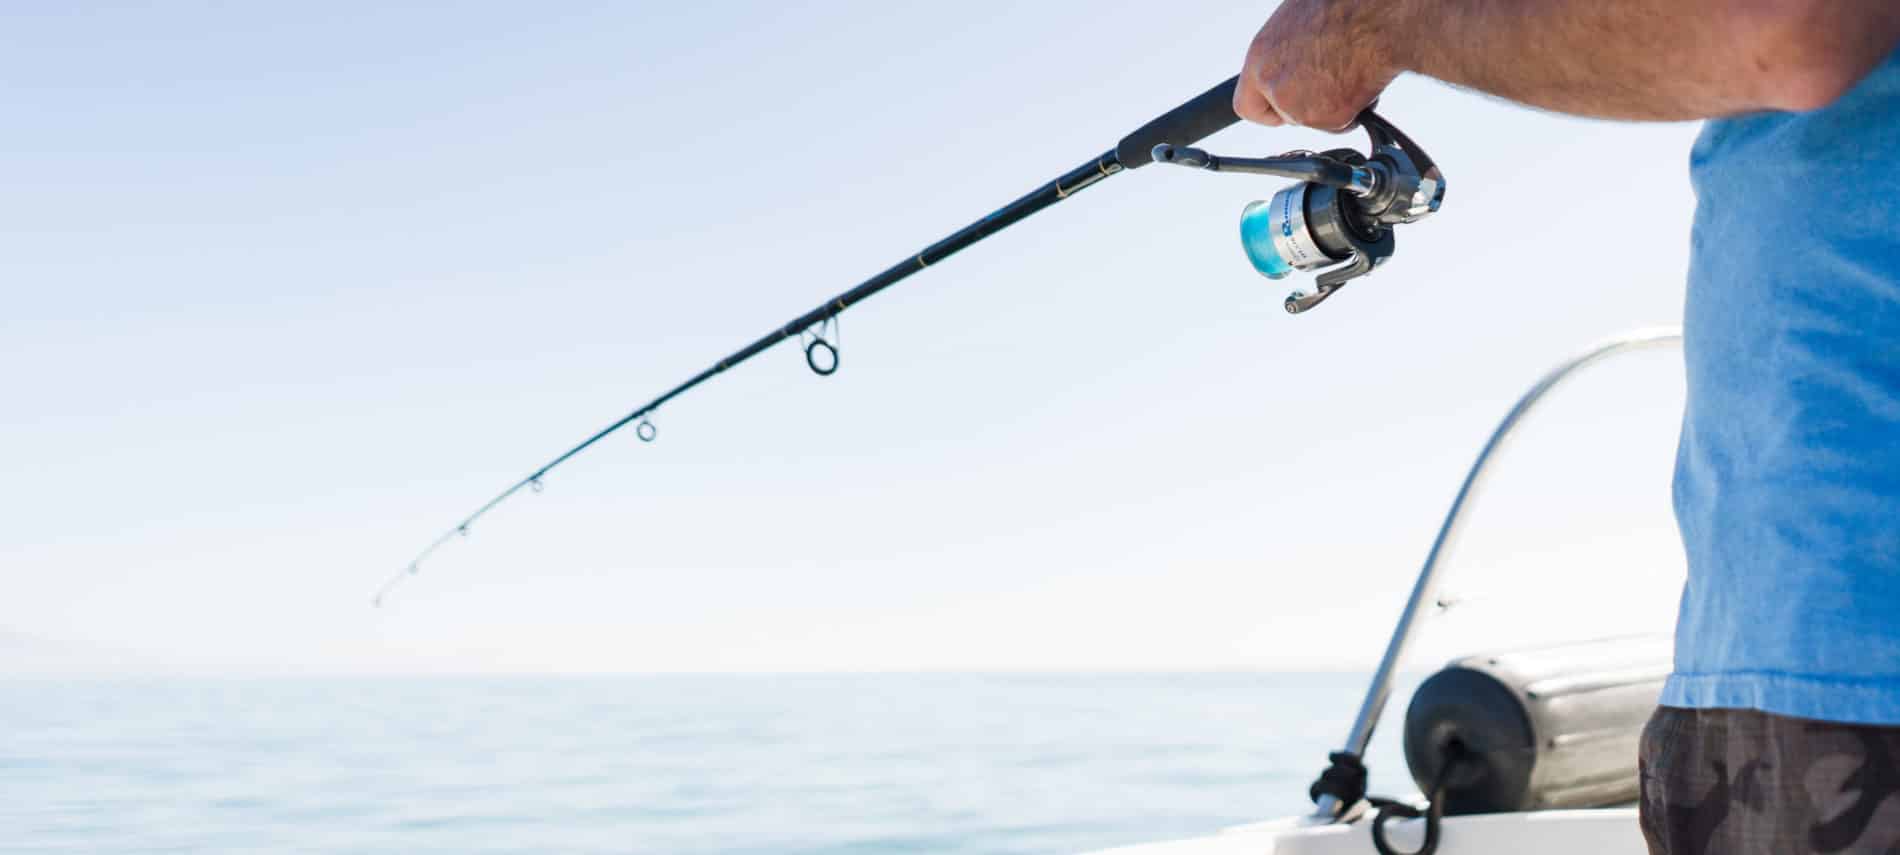 blue sky, darker blue water and hands holding a fishing pole over the side of the boat.